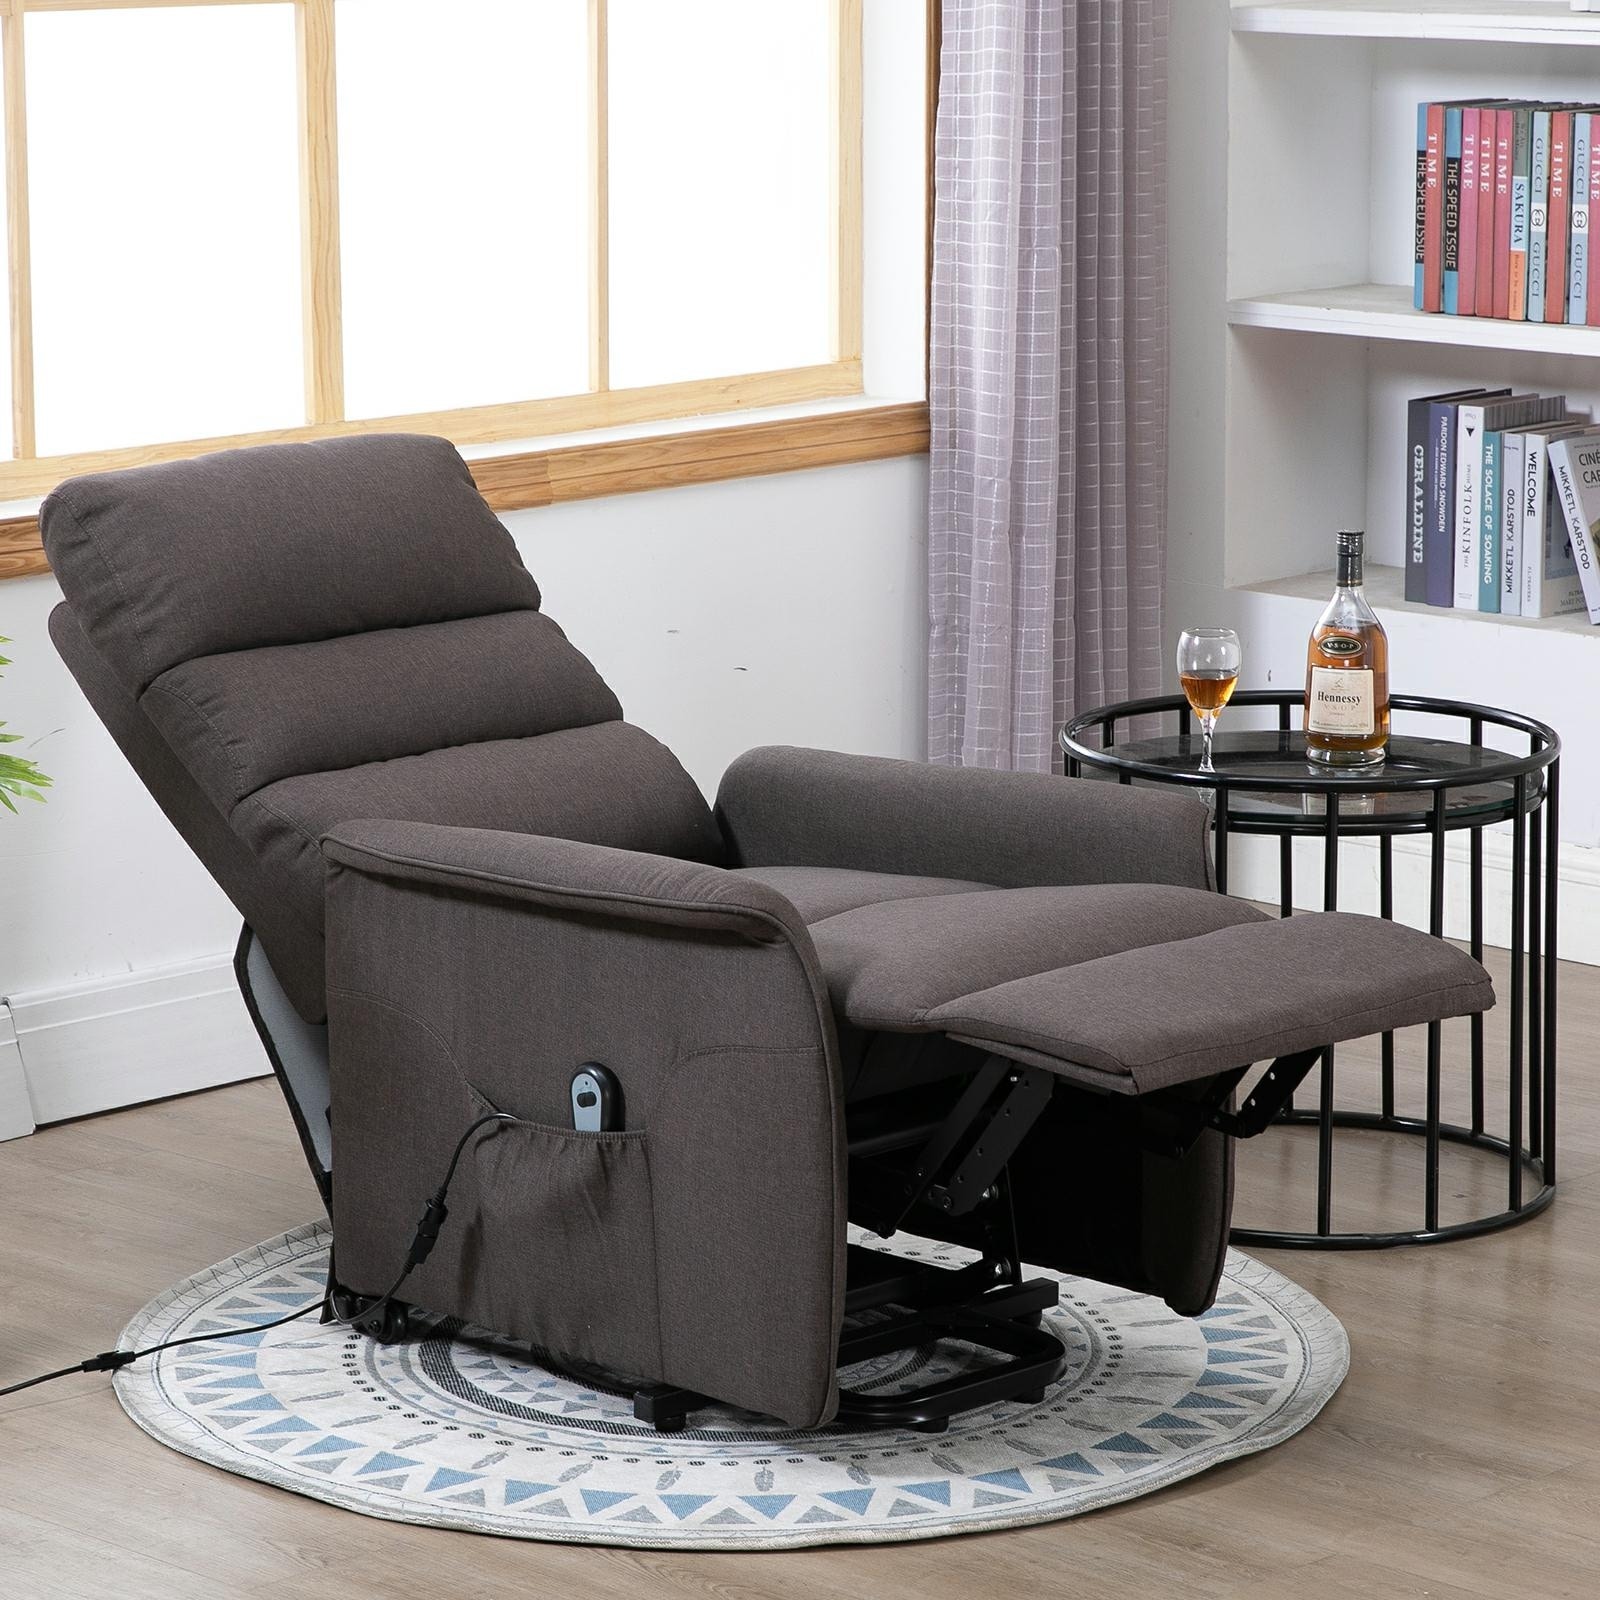 https://ak1.ostkcdn.com/images/products/is/images/direct/af8ca183afc6a3cf40be20c53f39d4f5d325232b/HOMCOM-Power-Lift-Assist-Recliner-Chair-for-Elderly-with-Wheels-and-Remote-Control.jpg